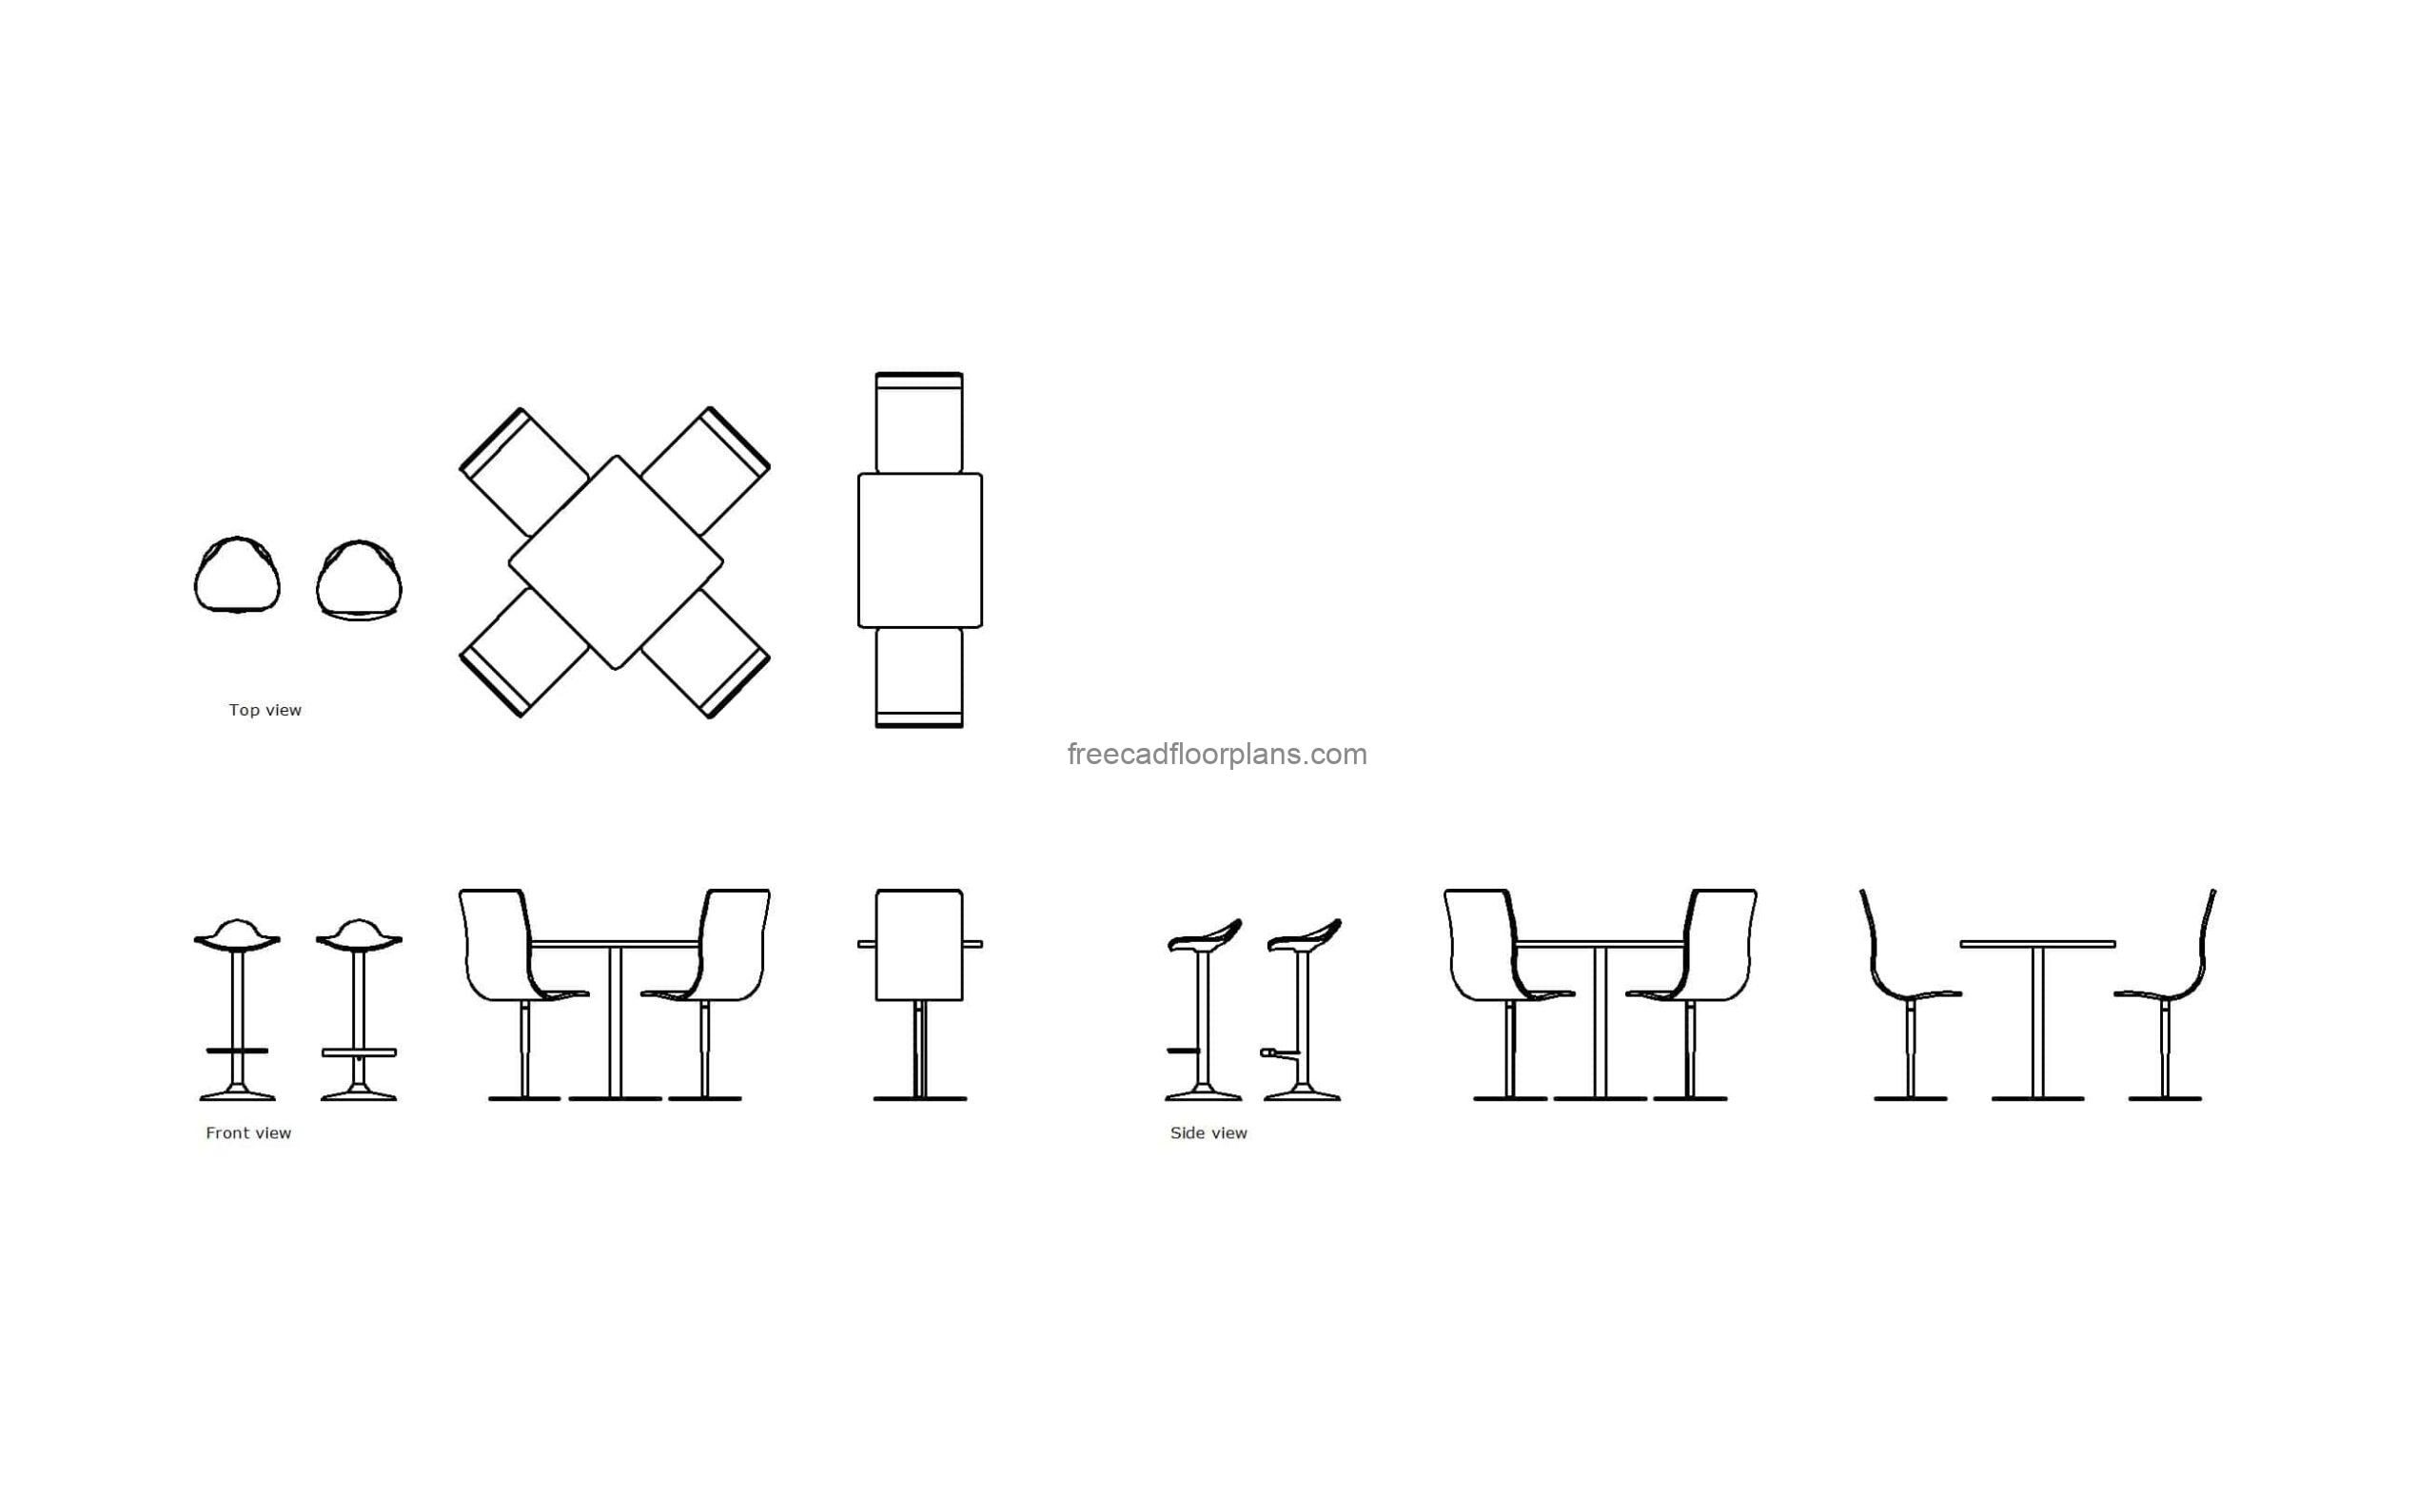 autocad 2d drawing of high top restaurant chairs, plan and elevation 2d views, dwg file free for download